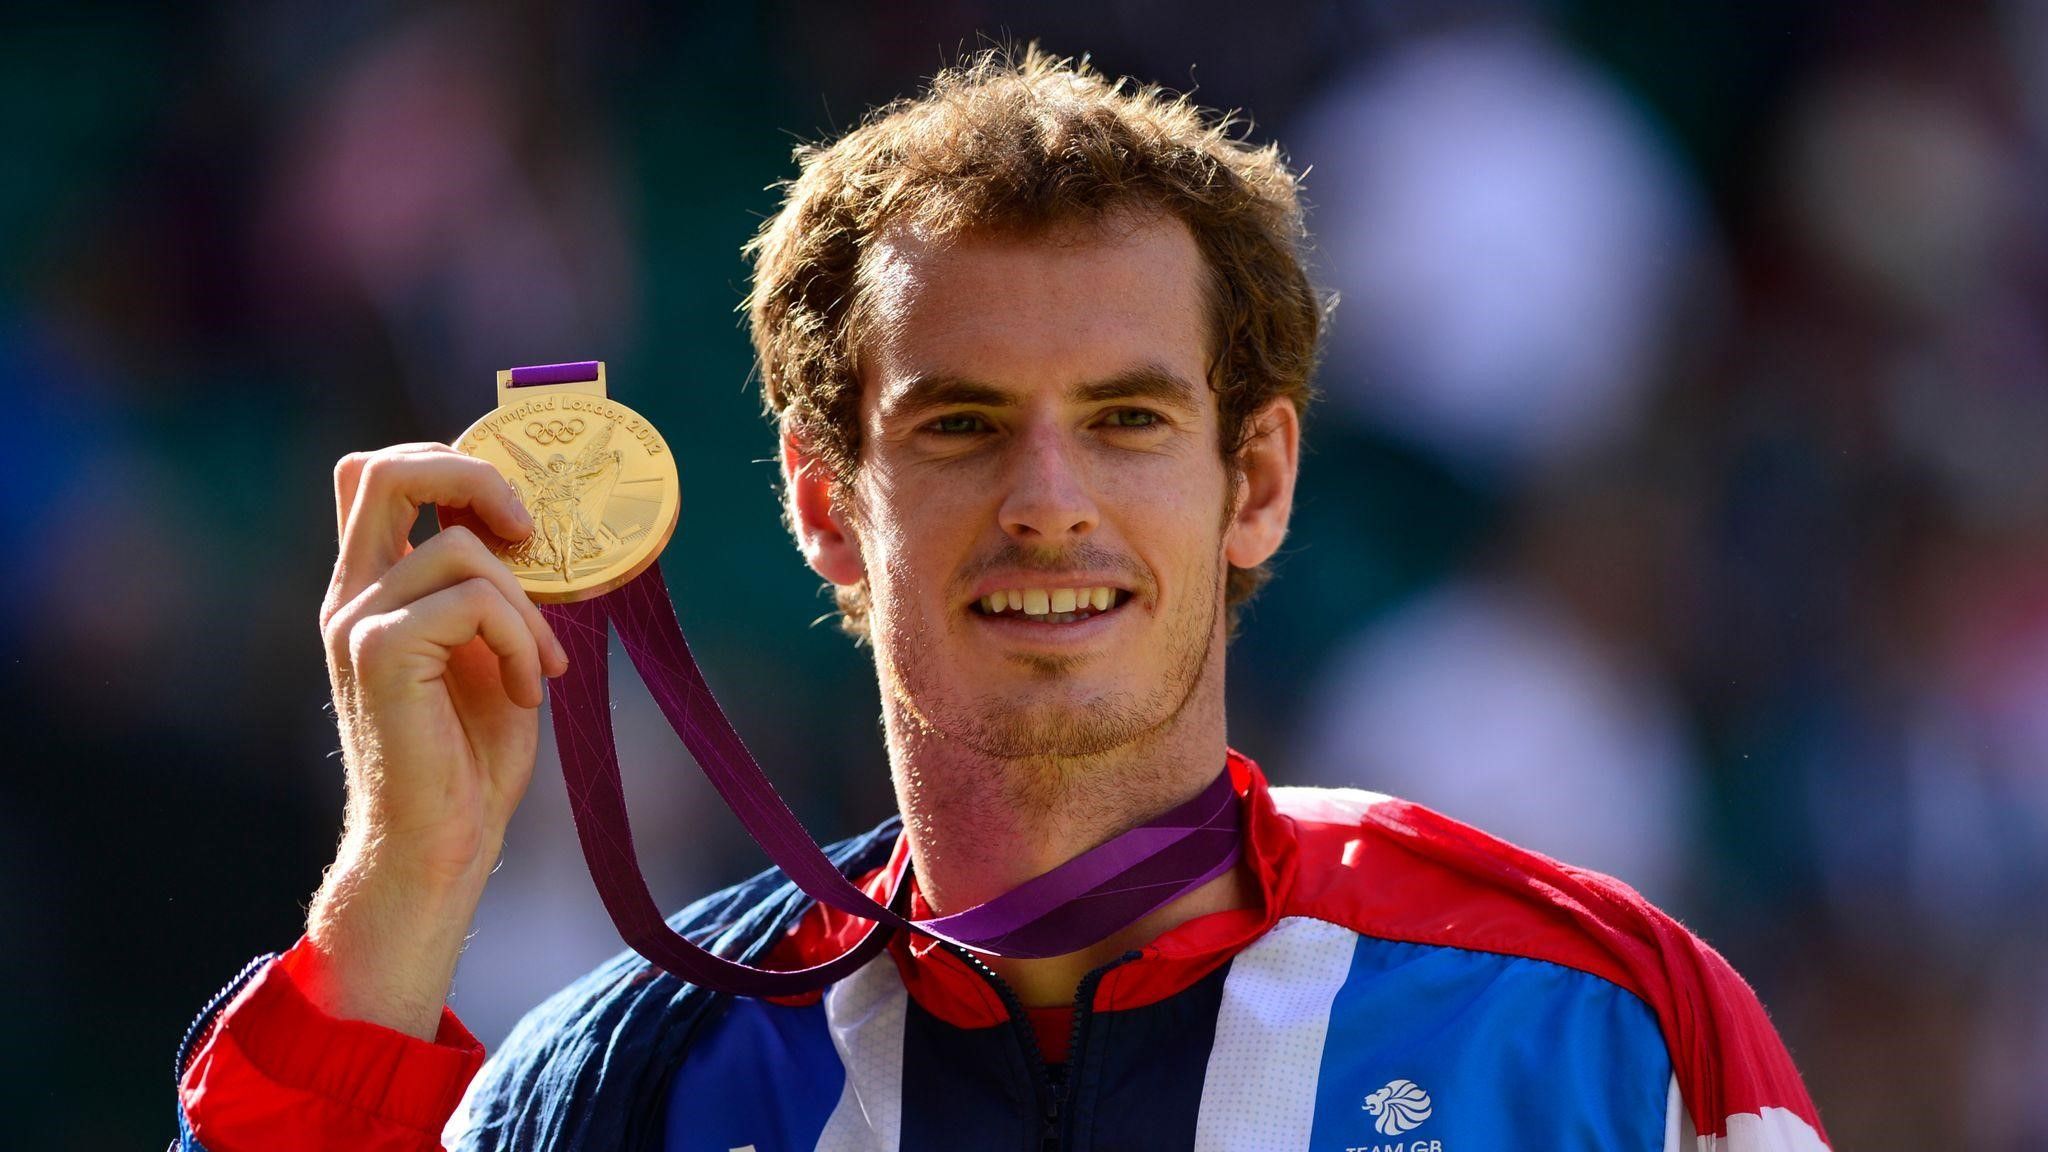 Andy Murray to face Felix Auger-Aliassime at the Olympics